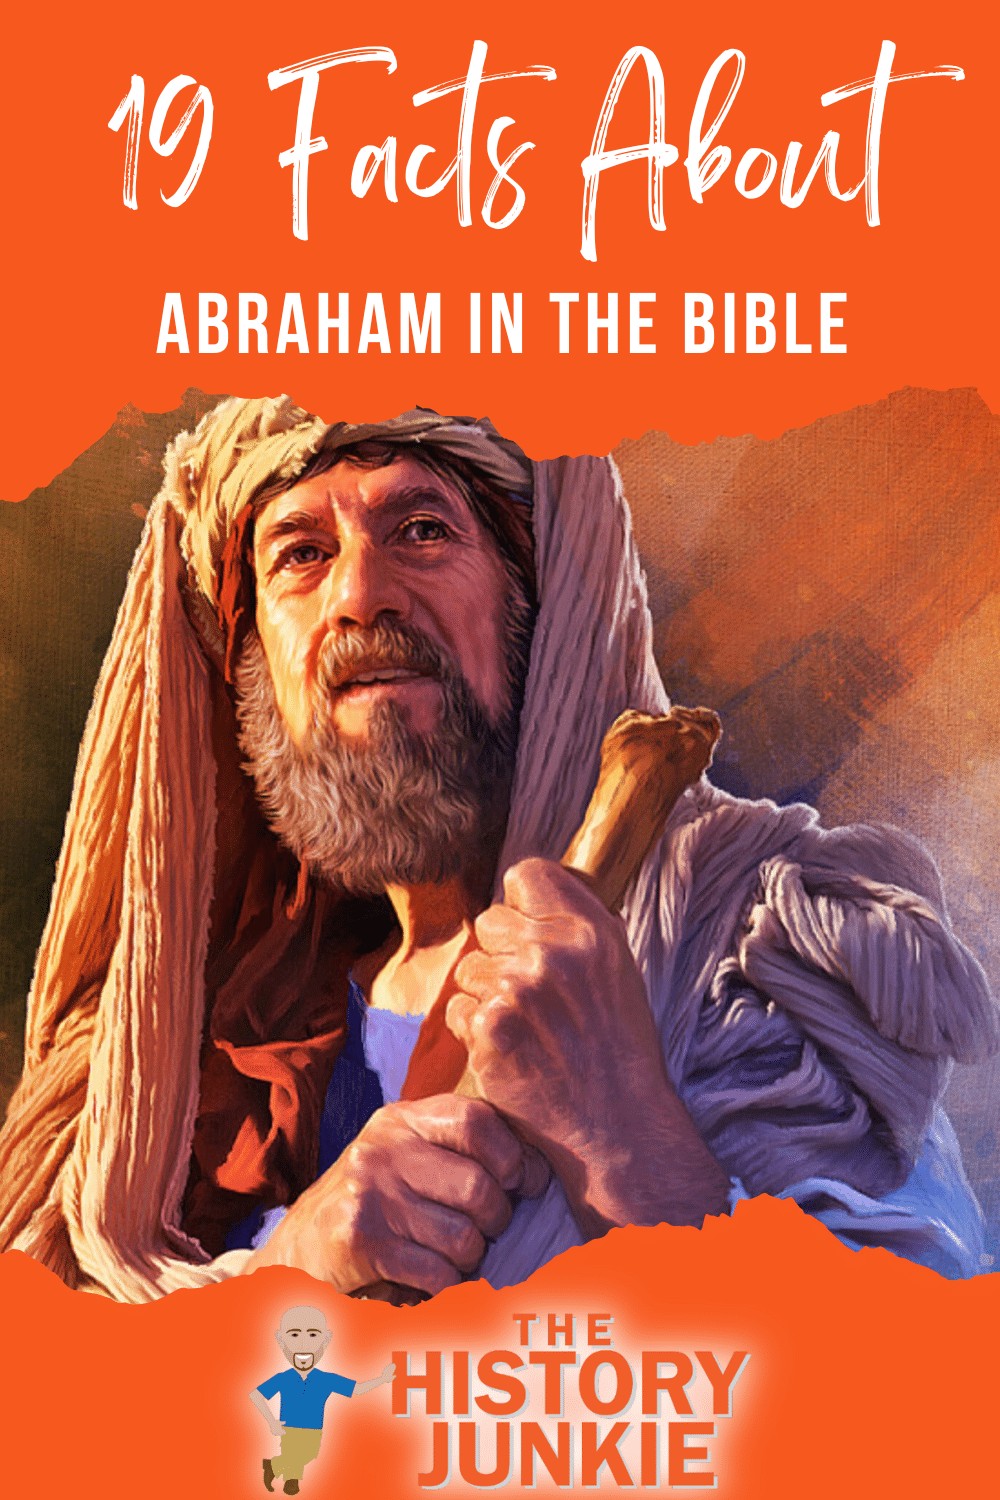 Abraham in the Bible